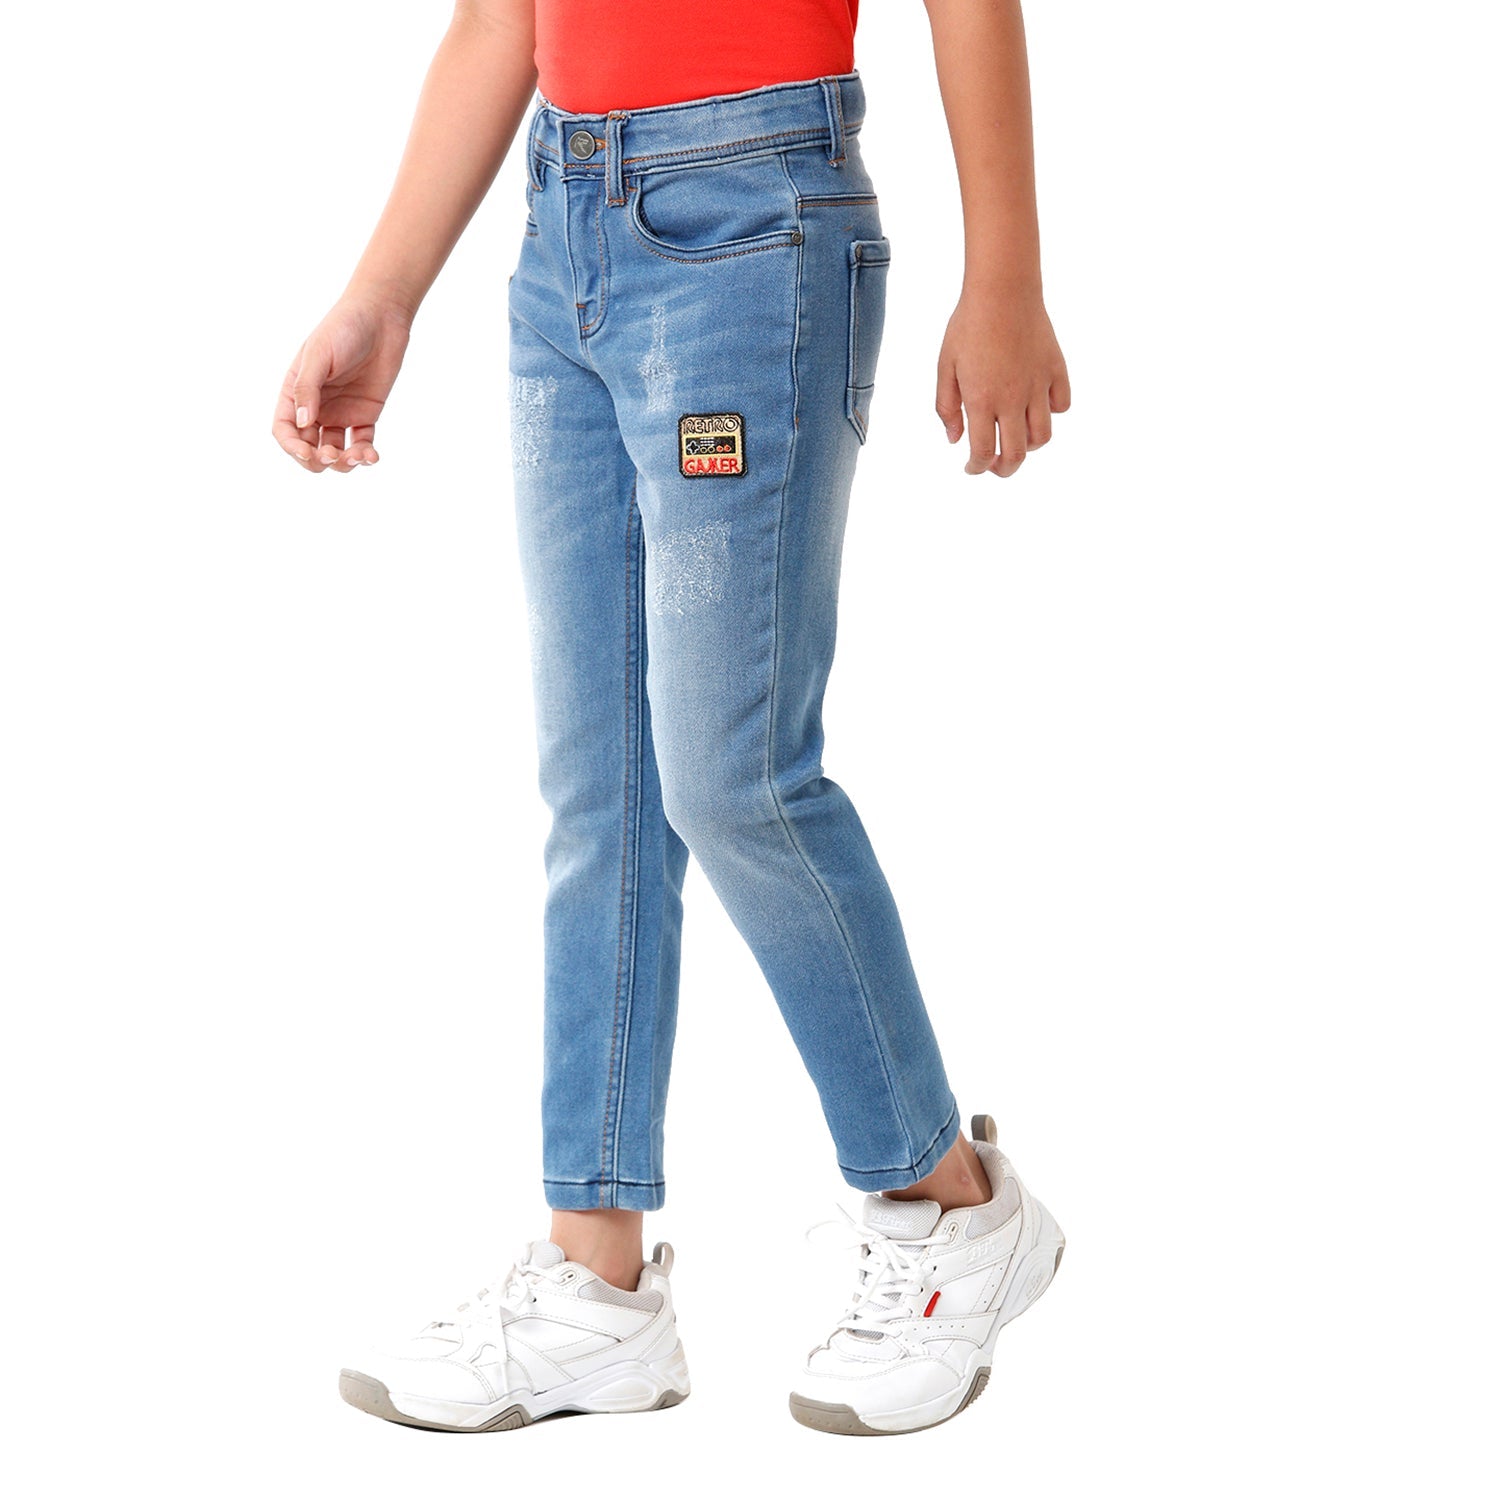 Classic Polo Bro Boys Solid Slim Fit Light Blue Color Denim Jeans - BBD S1 02A Jeans Classic Polo 